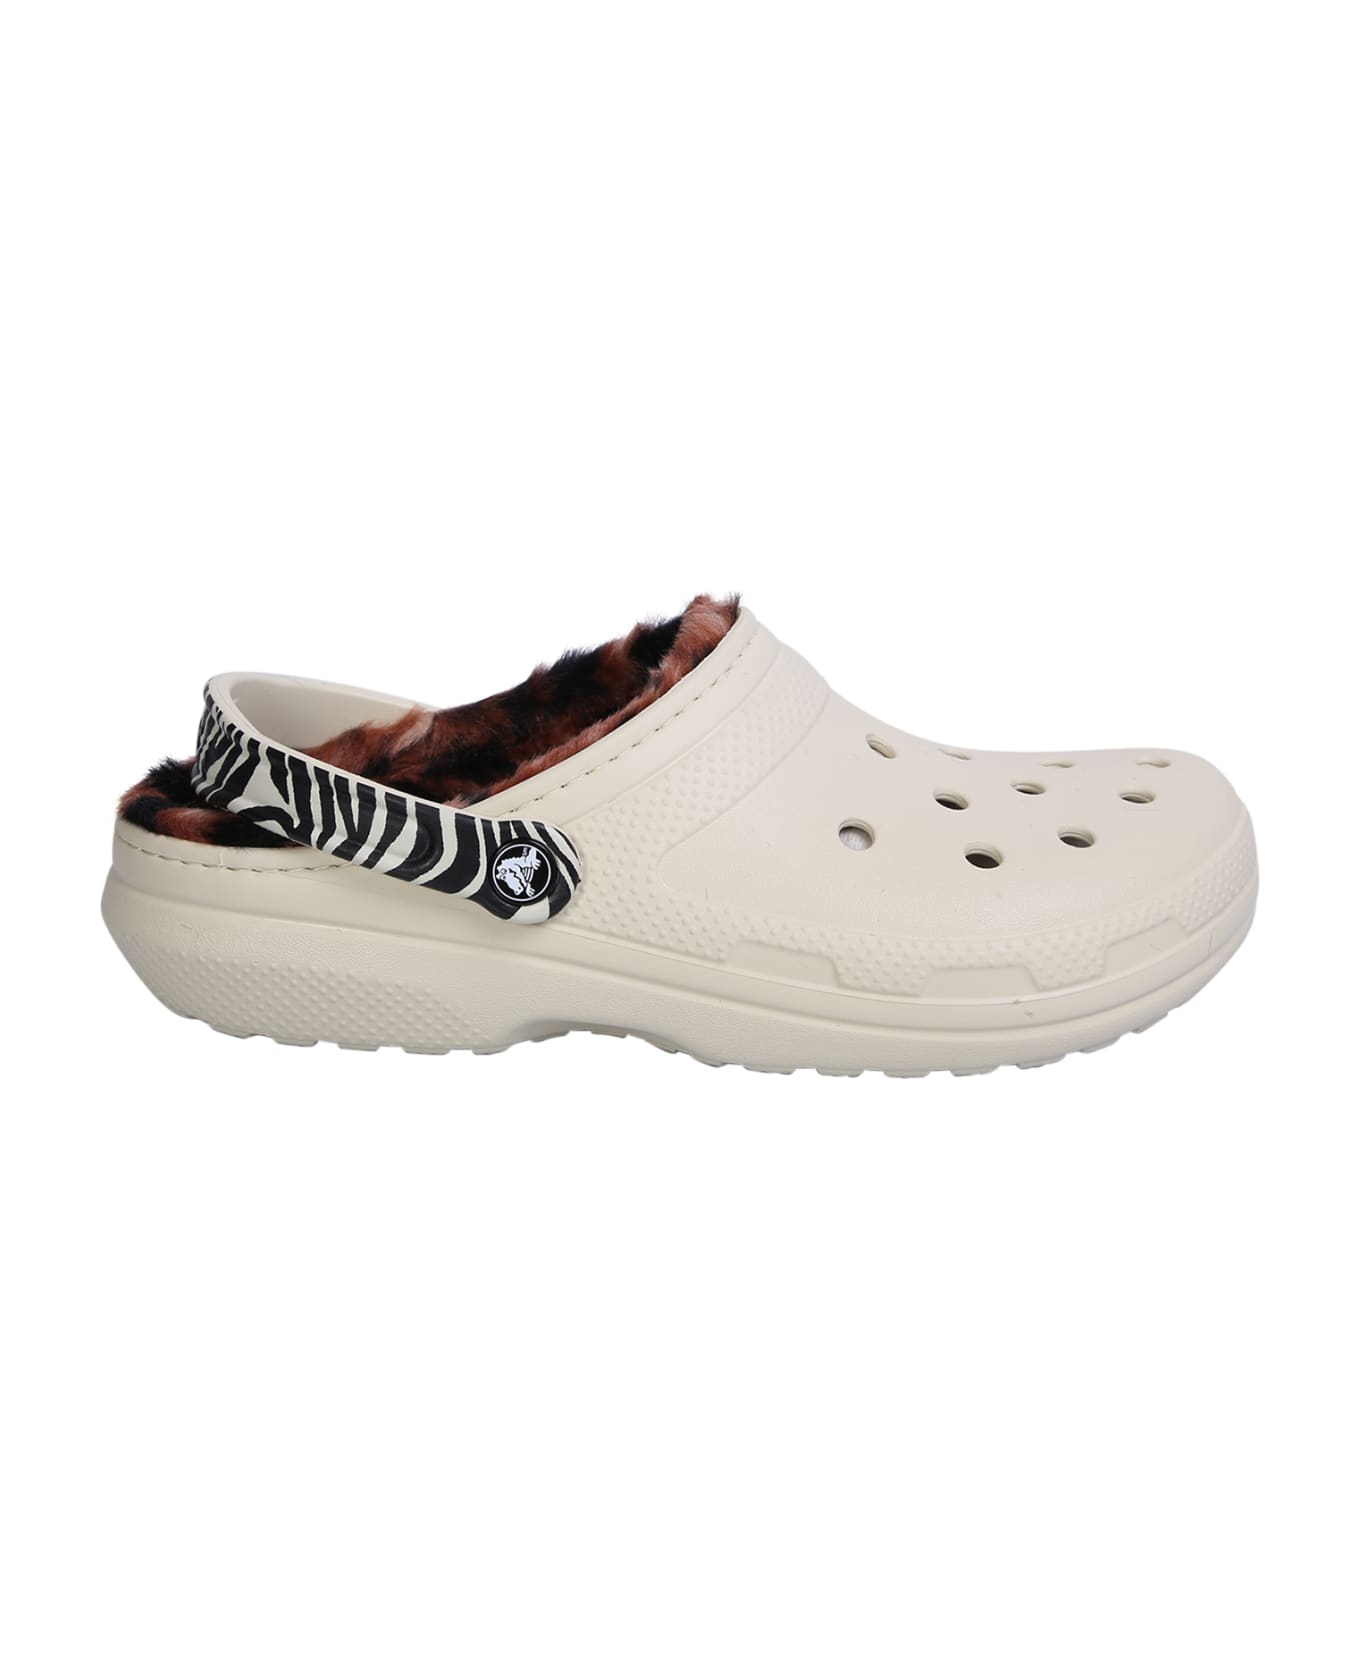 Crocs Lined Animal Clog Sandals In White - White